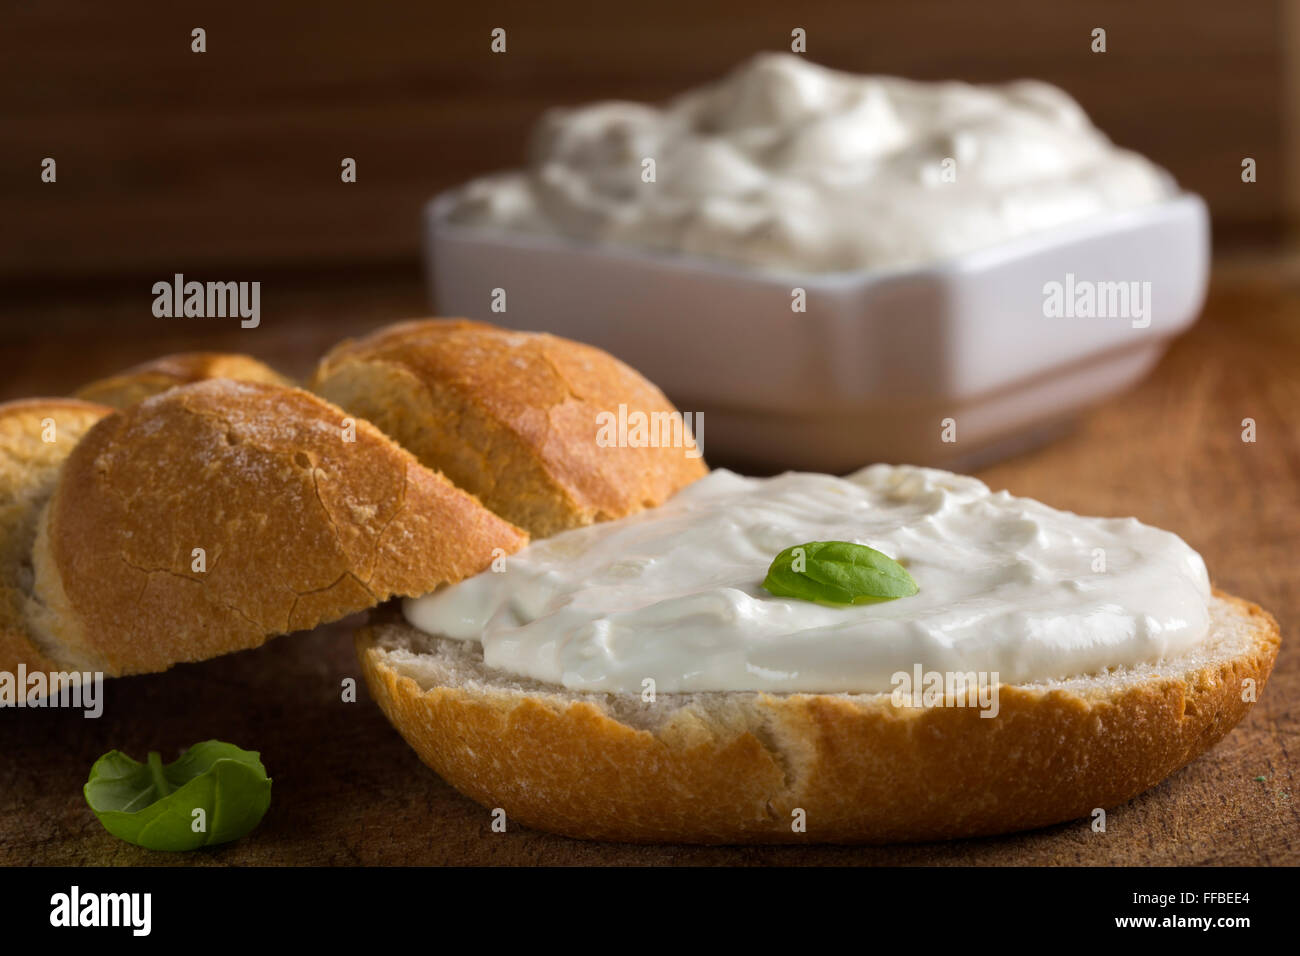 Healthy Organic Whole Grain Bagel with Cream Cheese over wooden background Stock Photo